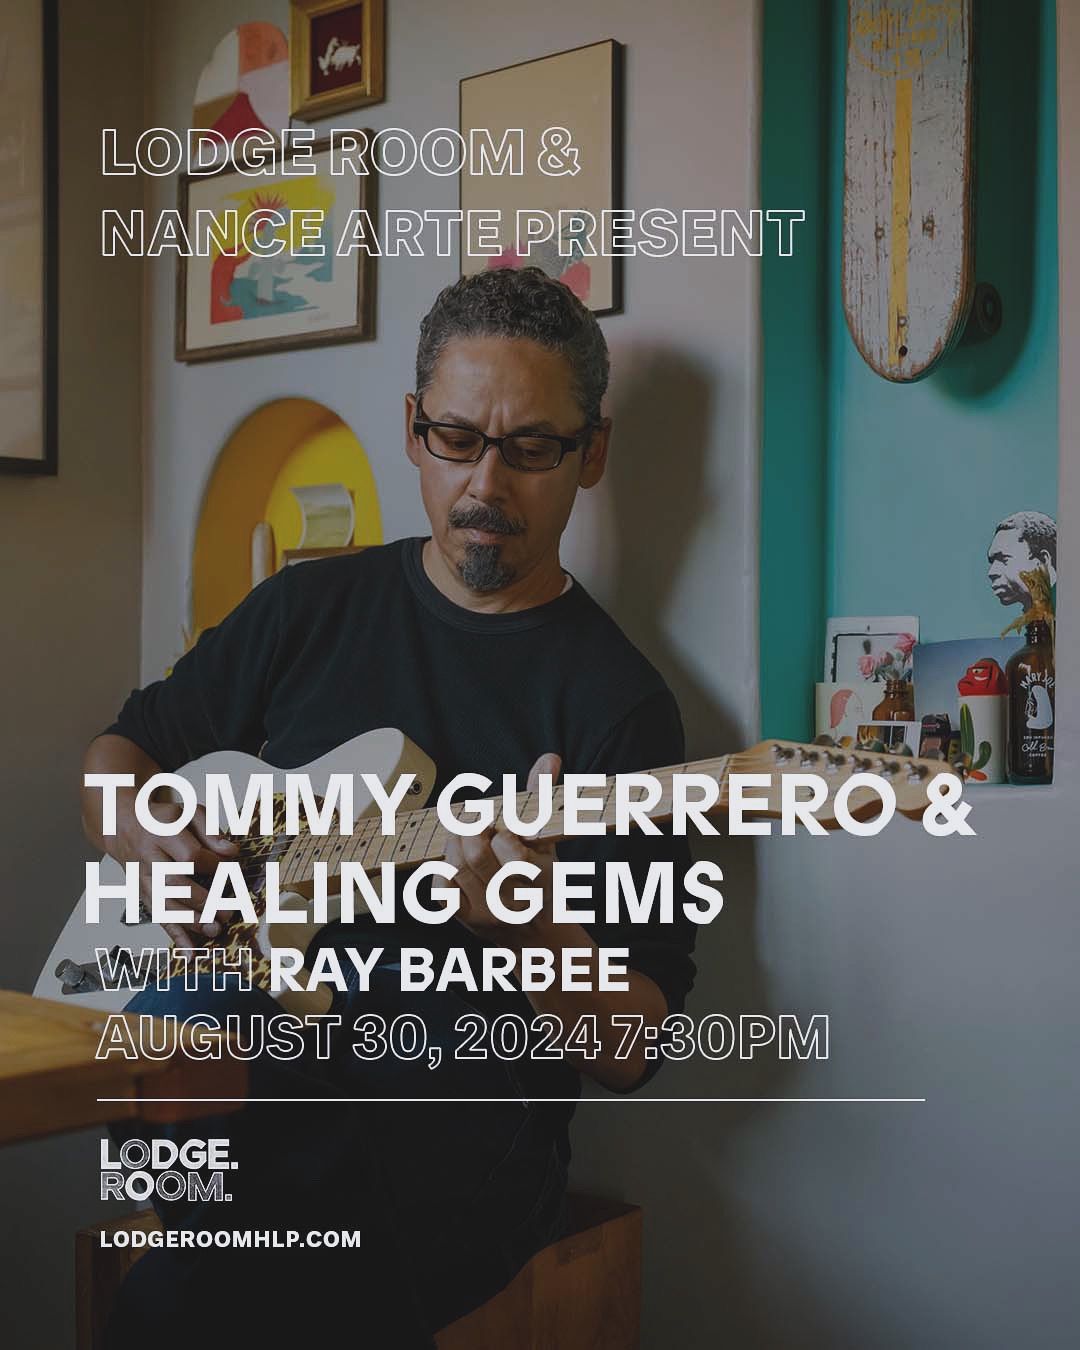 Tommy Guerrero + Healing Gems & Ray Barbee at The Lodge Room